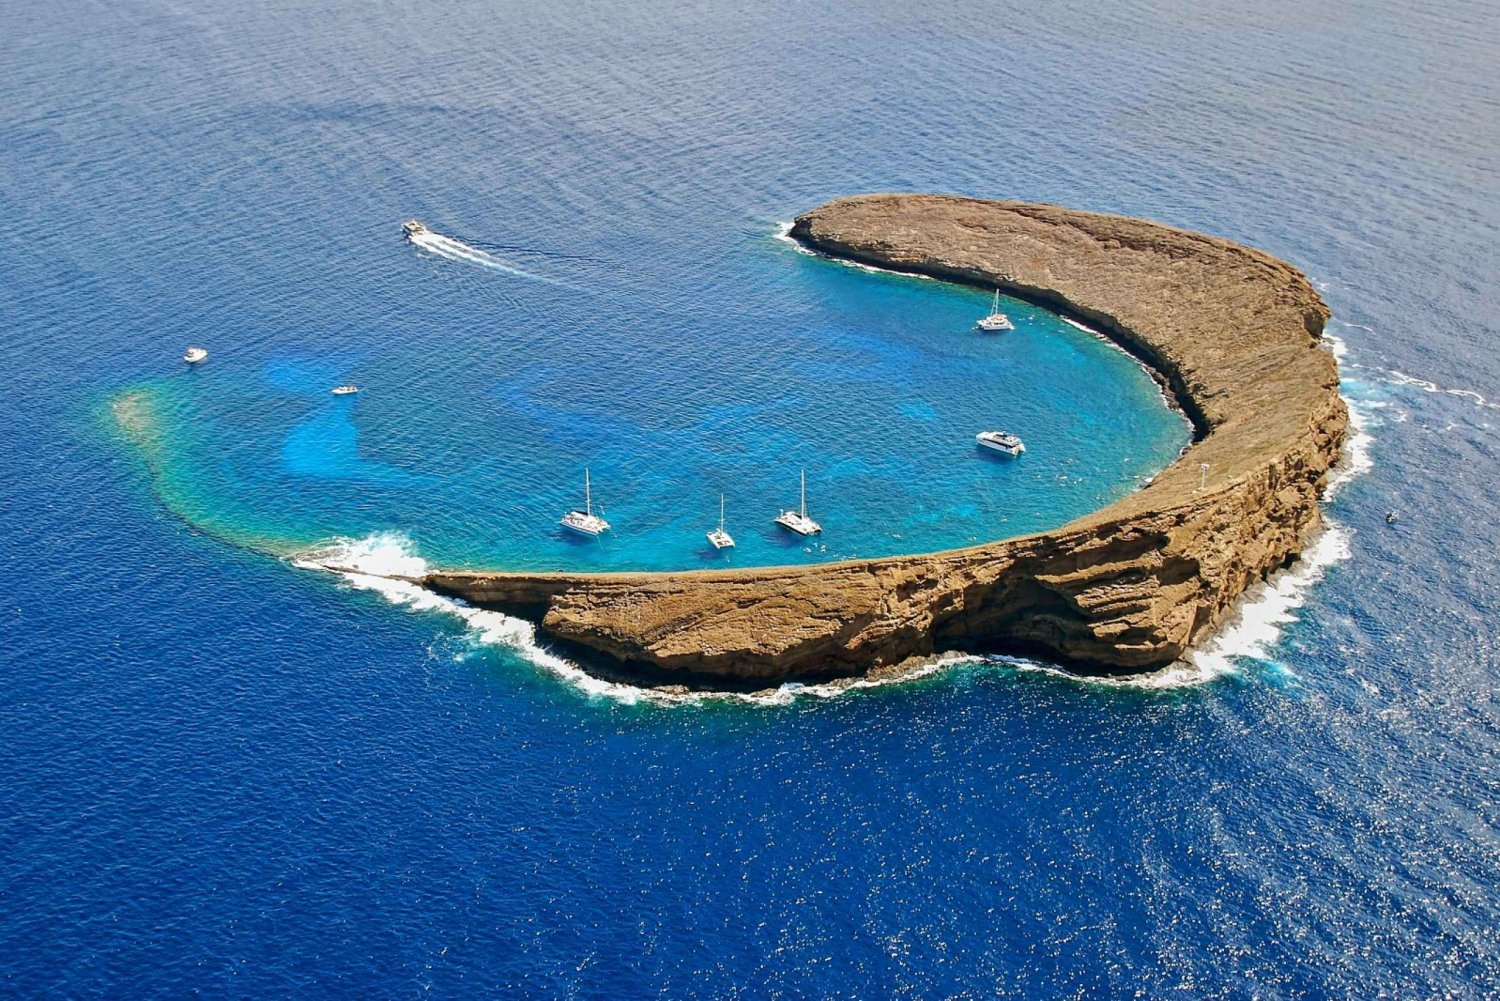 Maui: Molokini Snorkel and Performance Sail with Lunch